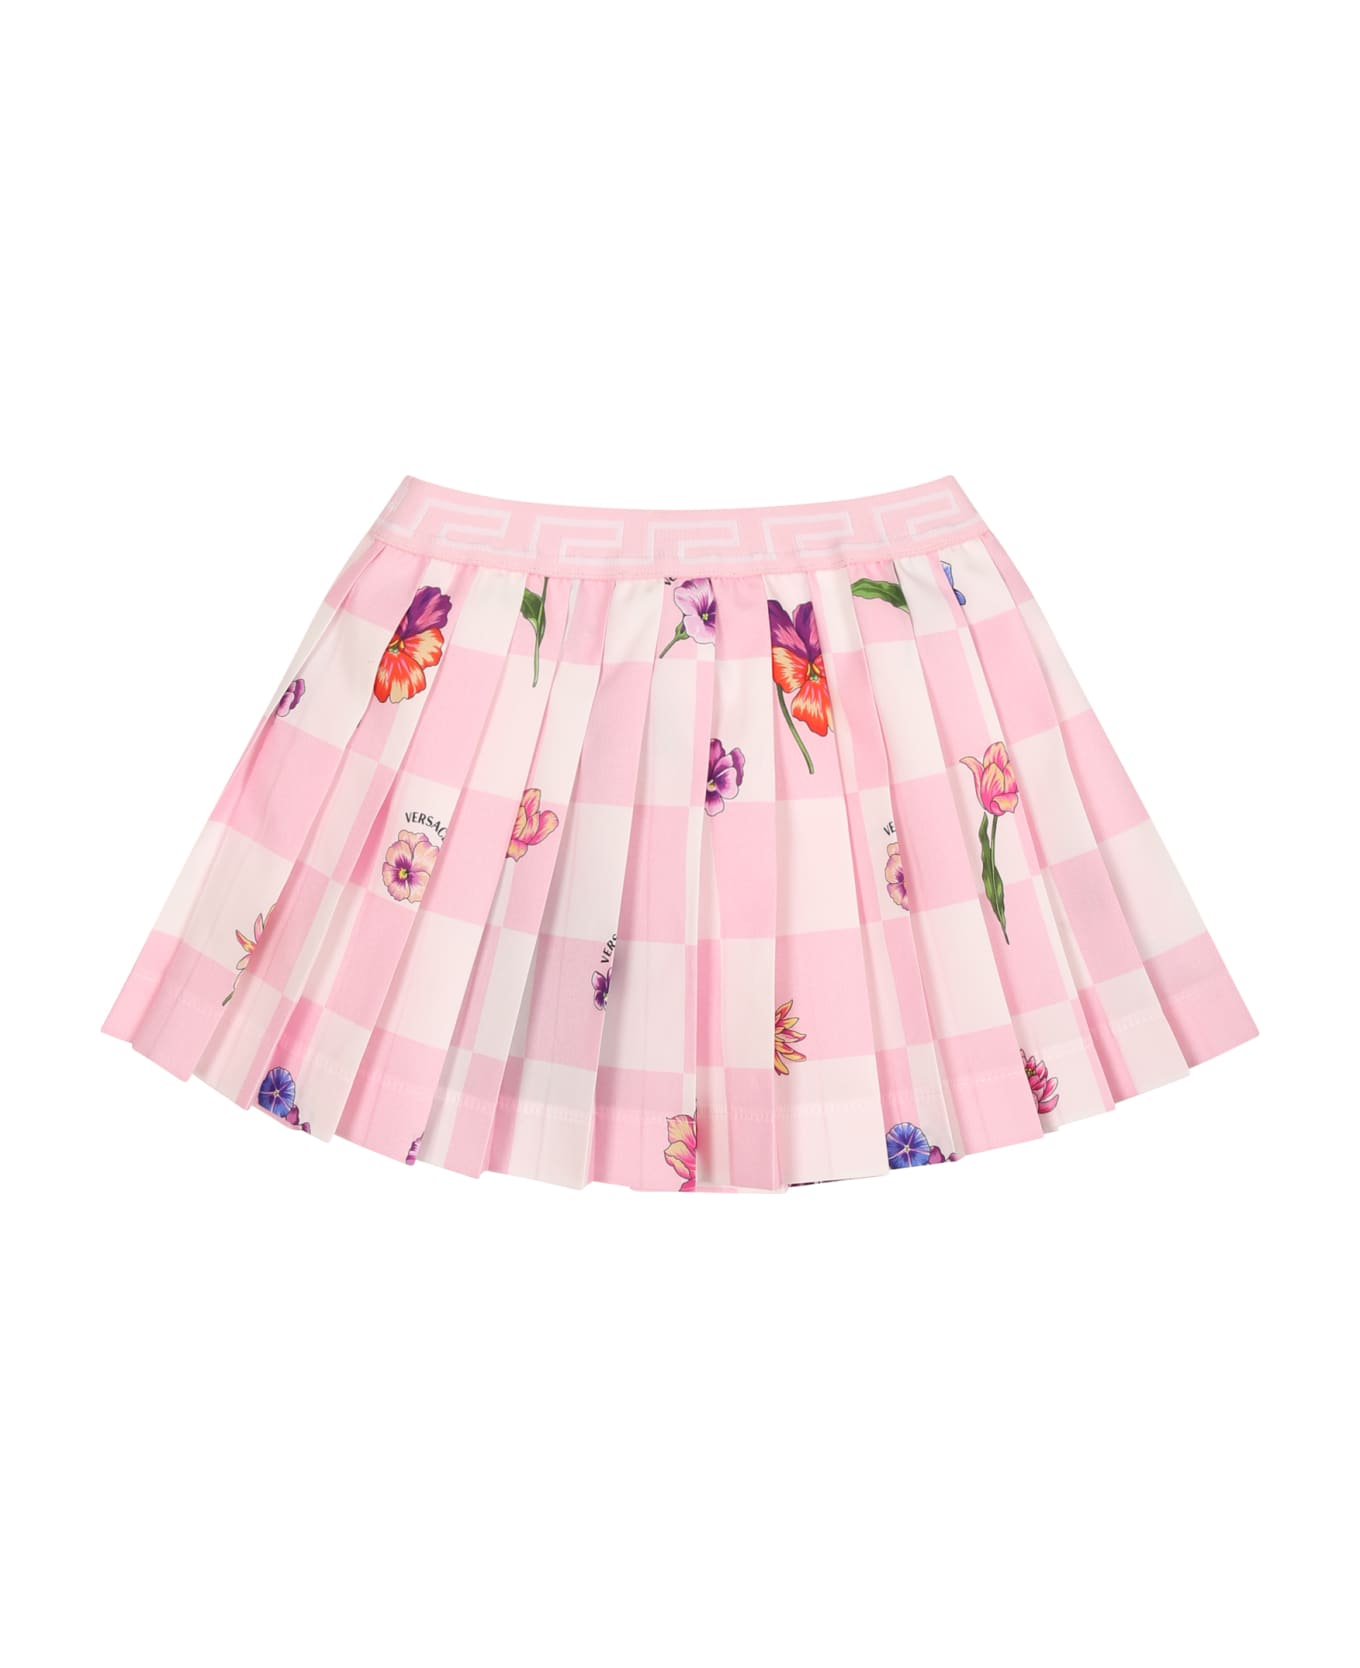 Versace Pink Skirt For Baby Girl With Flower Print - Pink